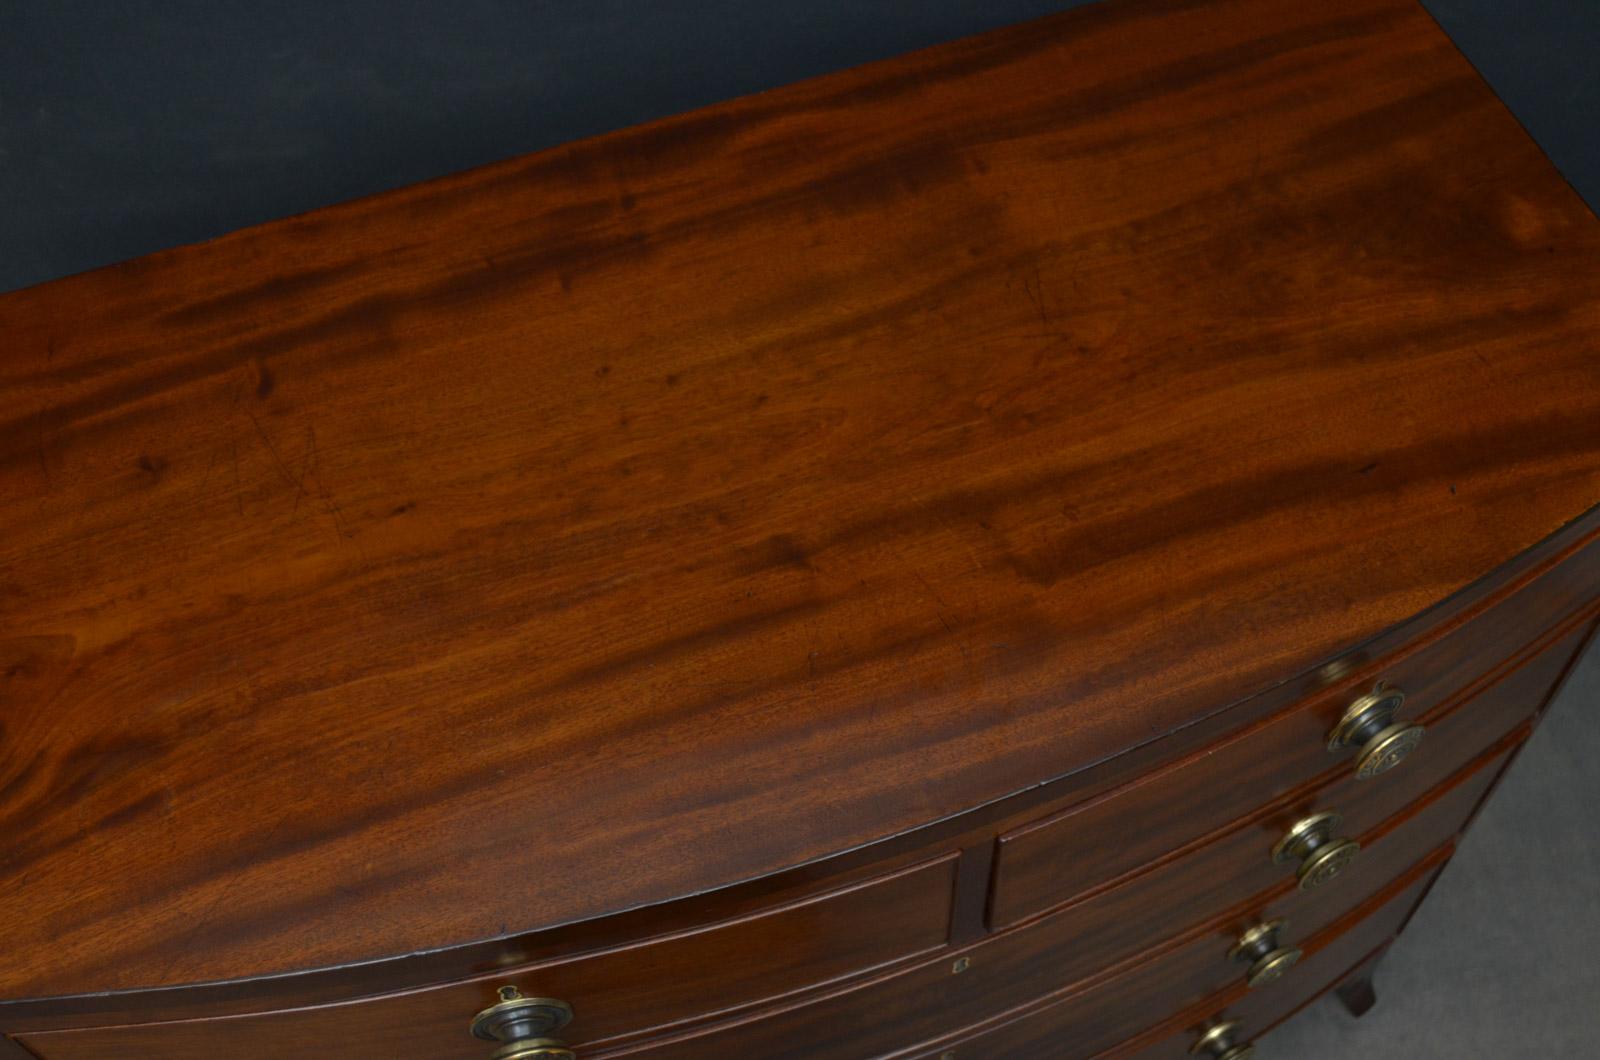 Sn4442 Regency mahogany chest of drawers of bowfronted design, having figured mahogany top above 2 short and 3 long graduated and cockbeaded drawers, all fitted with original brass knobs, standing on splayed feet united by shaped apron. This antique